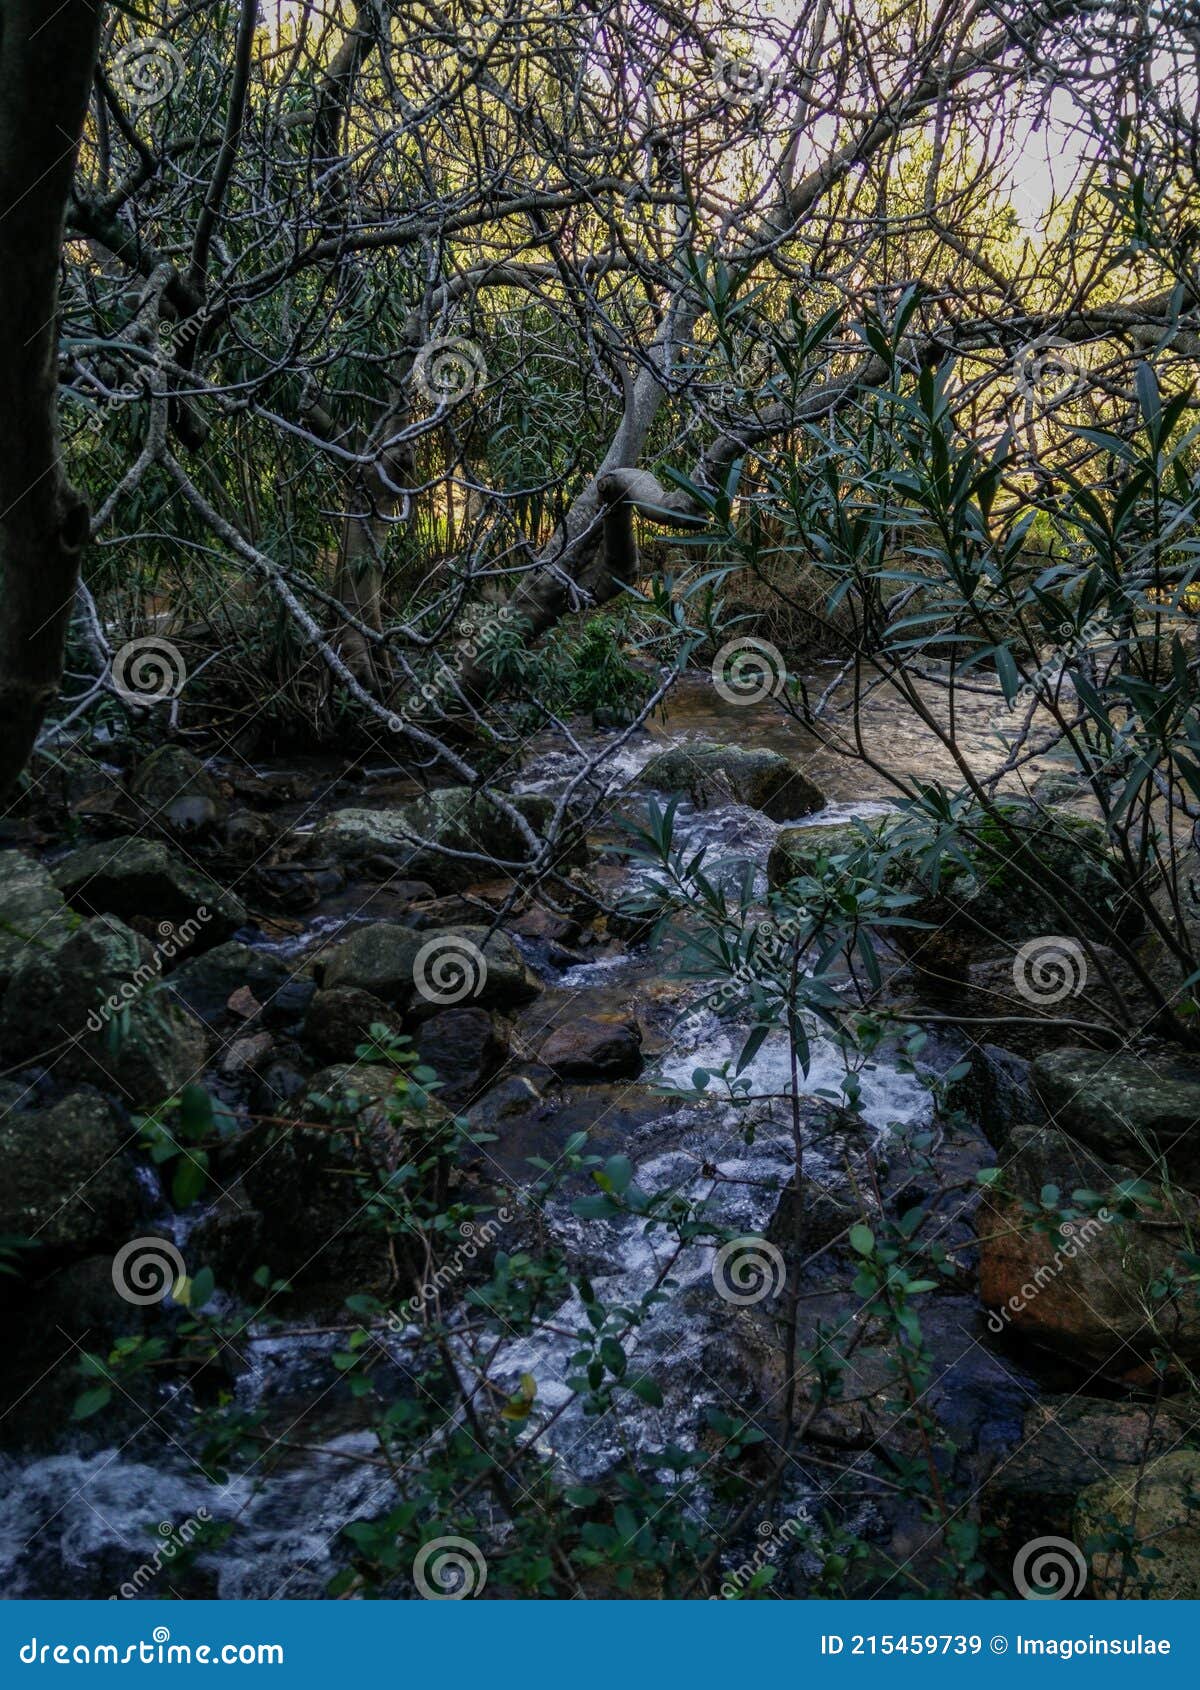 sardinia. natural environment. nerium oleander. oleander grove along the rio coxina, in the villacidro mountains